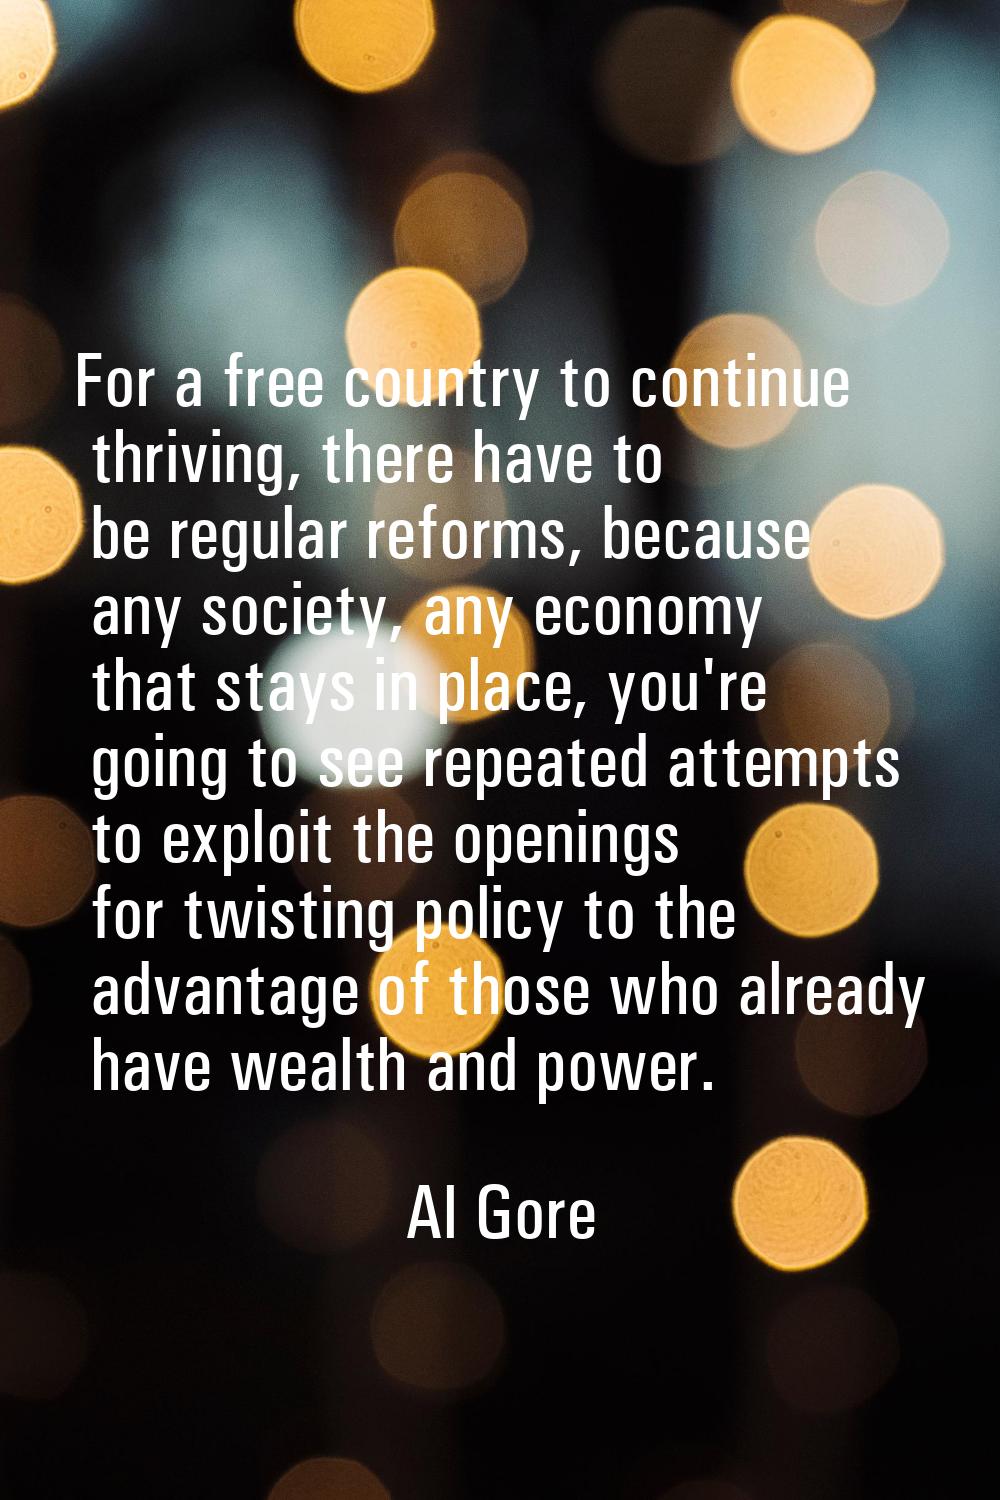 For a free country to continue thriving, there have to be regular reforms, because any society, any